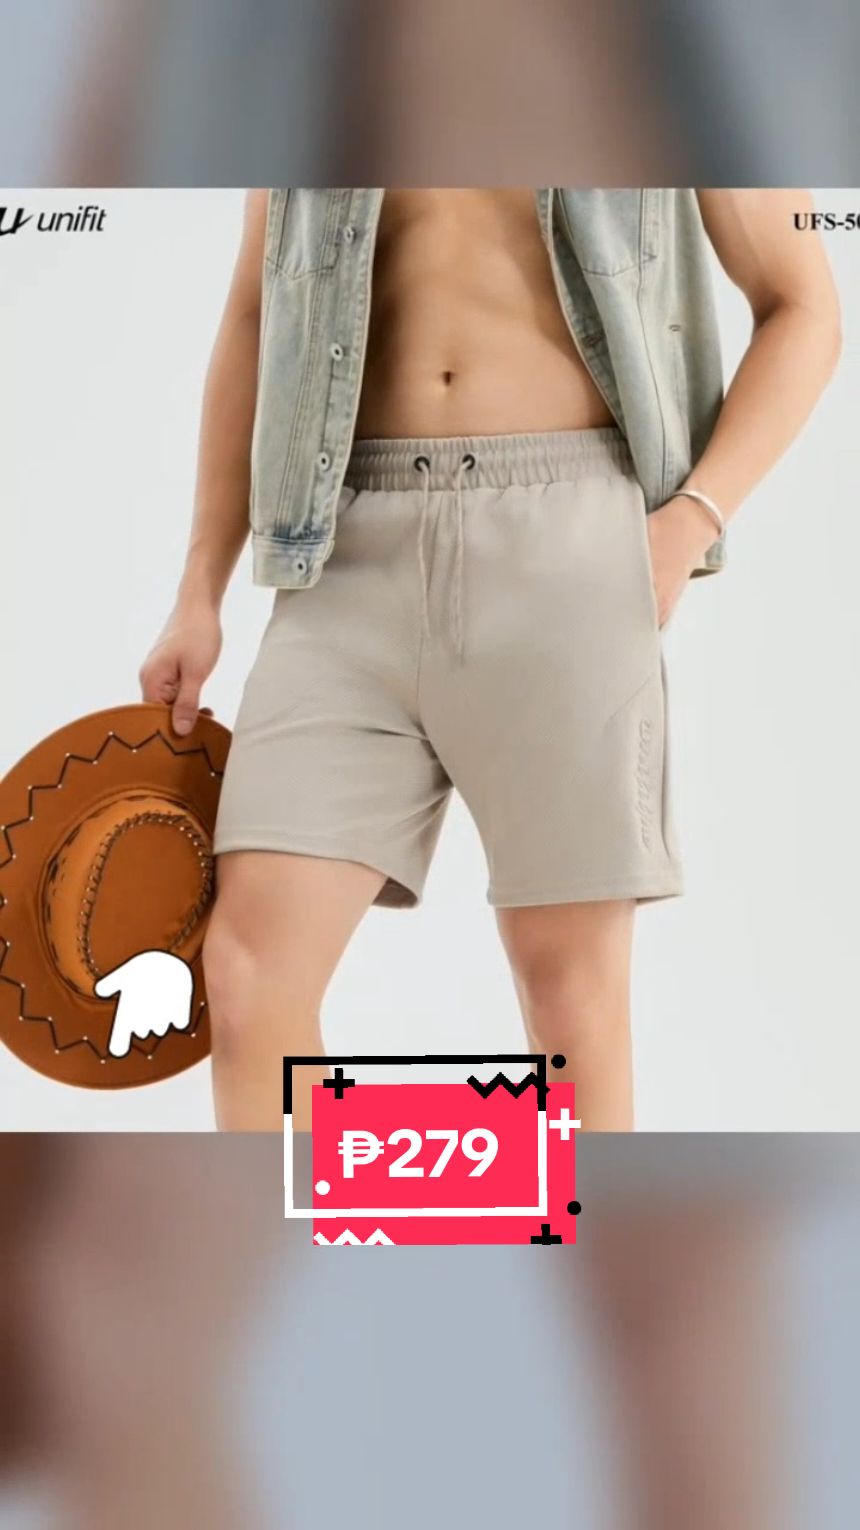 UNIFIT Men's Summer Twill Sweat Shorts - Above The Knee, Casual Menswear UFS-504 under ₱279.00 Hurry - Ends tomorrow! #casualshorts #twillshorts #shorts #short #TikTokShop #fyp #fashion 